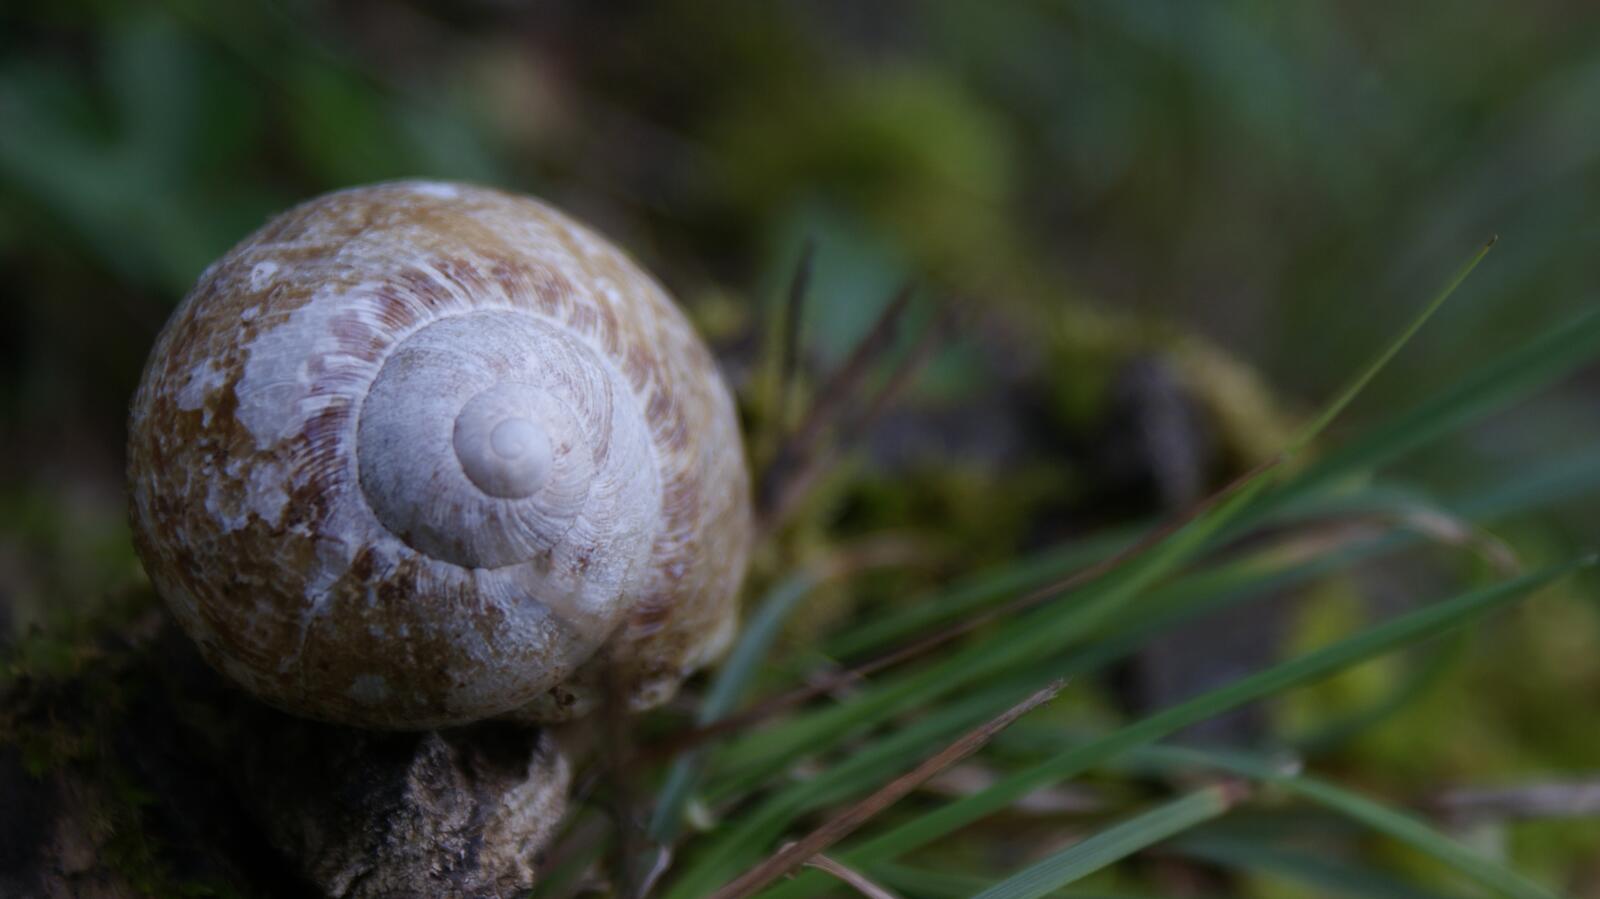 Free photo A close-up of a snail shell